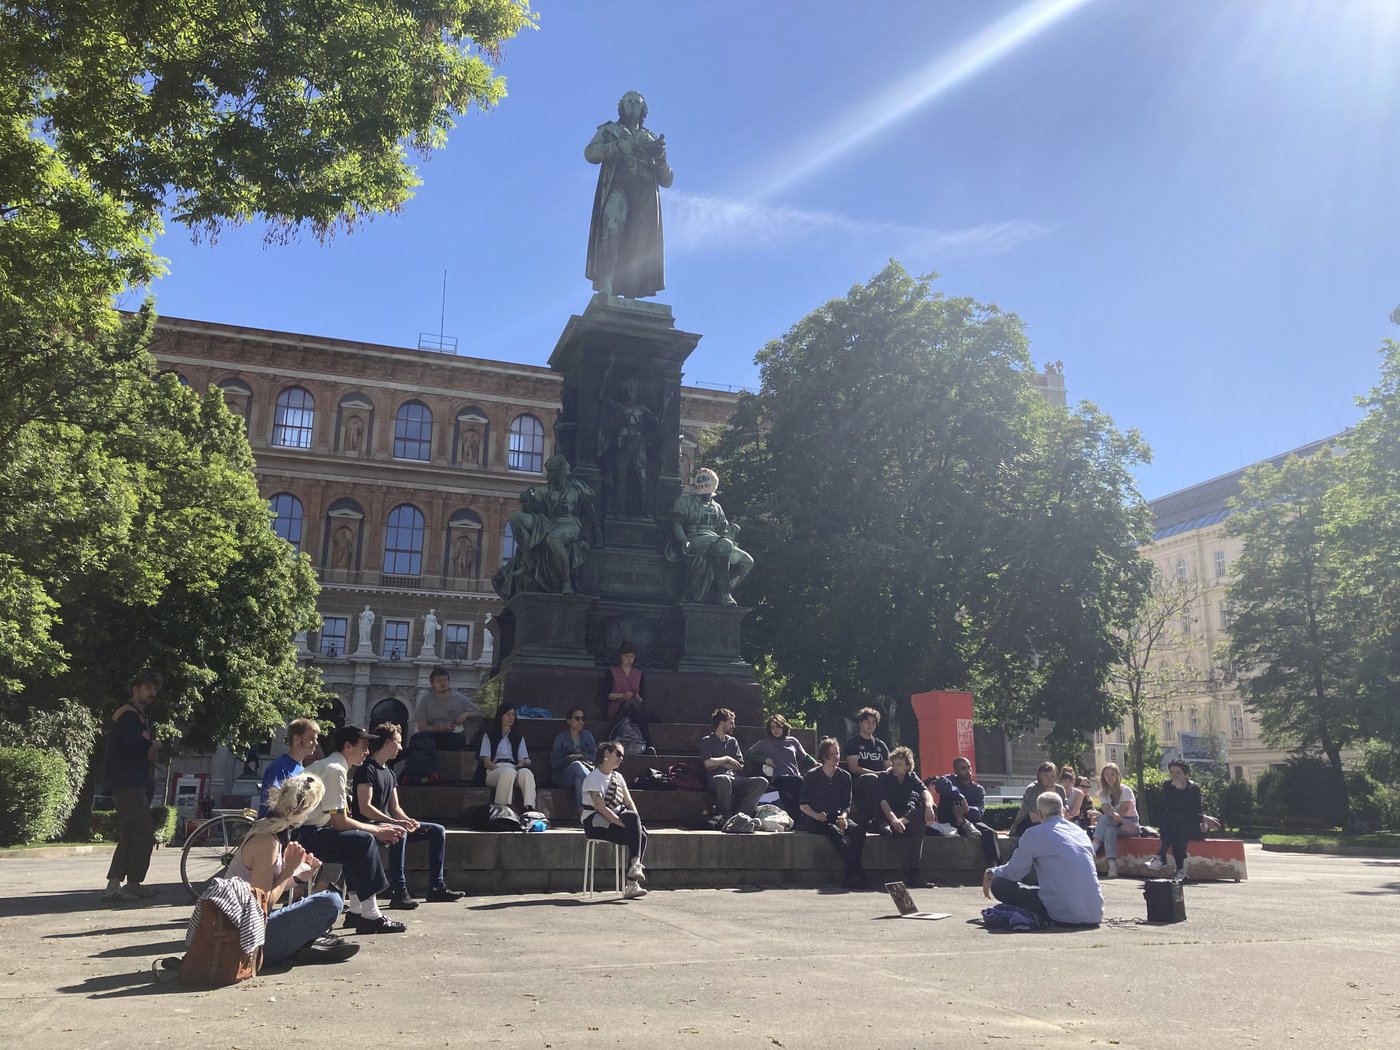 The picture shows a group of students sitting on the pedestal of the Schiller monument, obviously in a teaching situation. It is summer and you can see the baroque monument with Friedrich Schiller, some trees and behind it the Gründerzeit building of the academy.